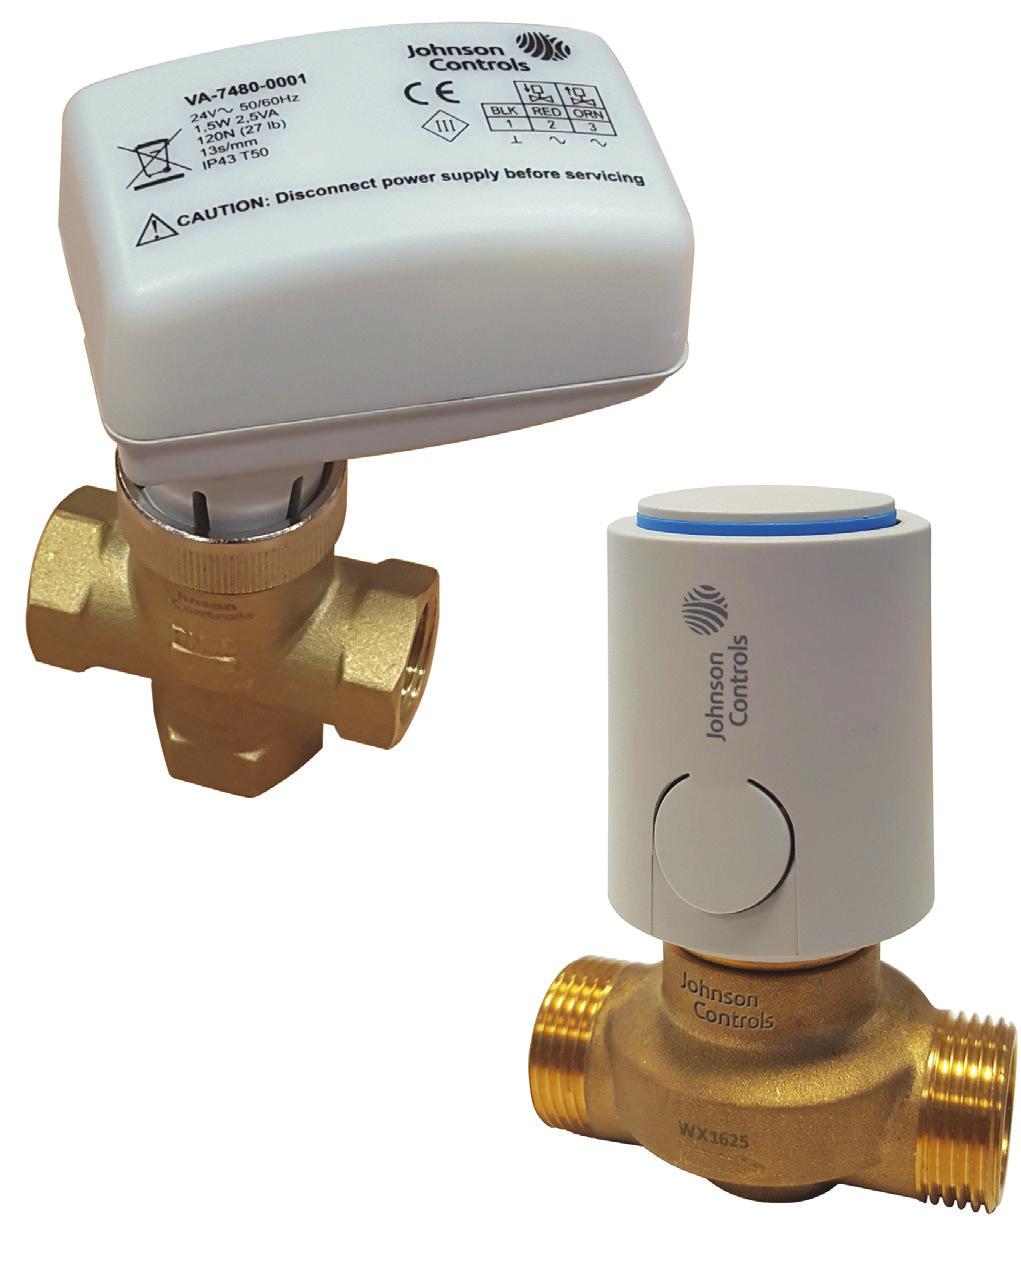 VG3000 Globe Valves Series for Terminal Units Product ulletin The VG3000 brass valve series is primarily designed to regulate the flow of water in response to the demand of a controller in zone and